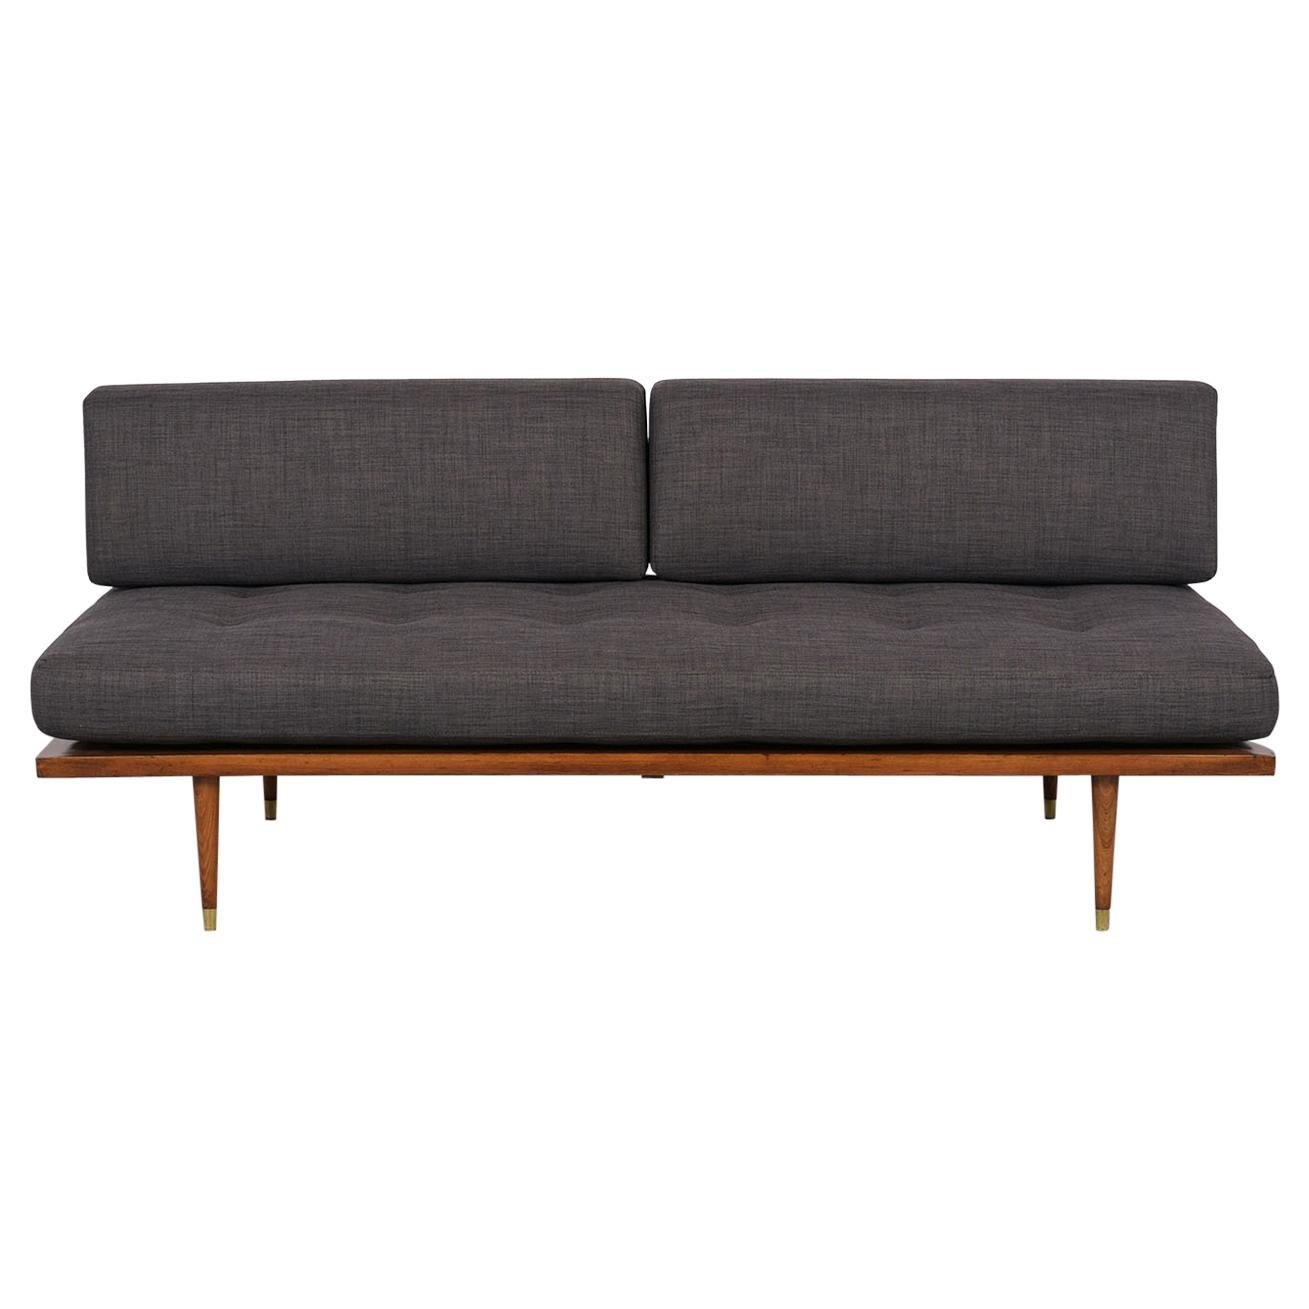 Adrian Pearsall Mid-Century Modern Daybed